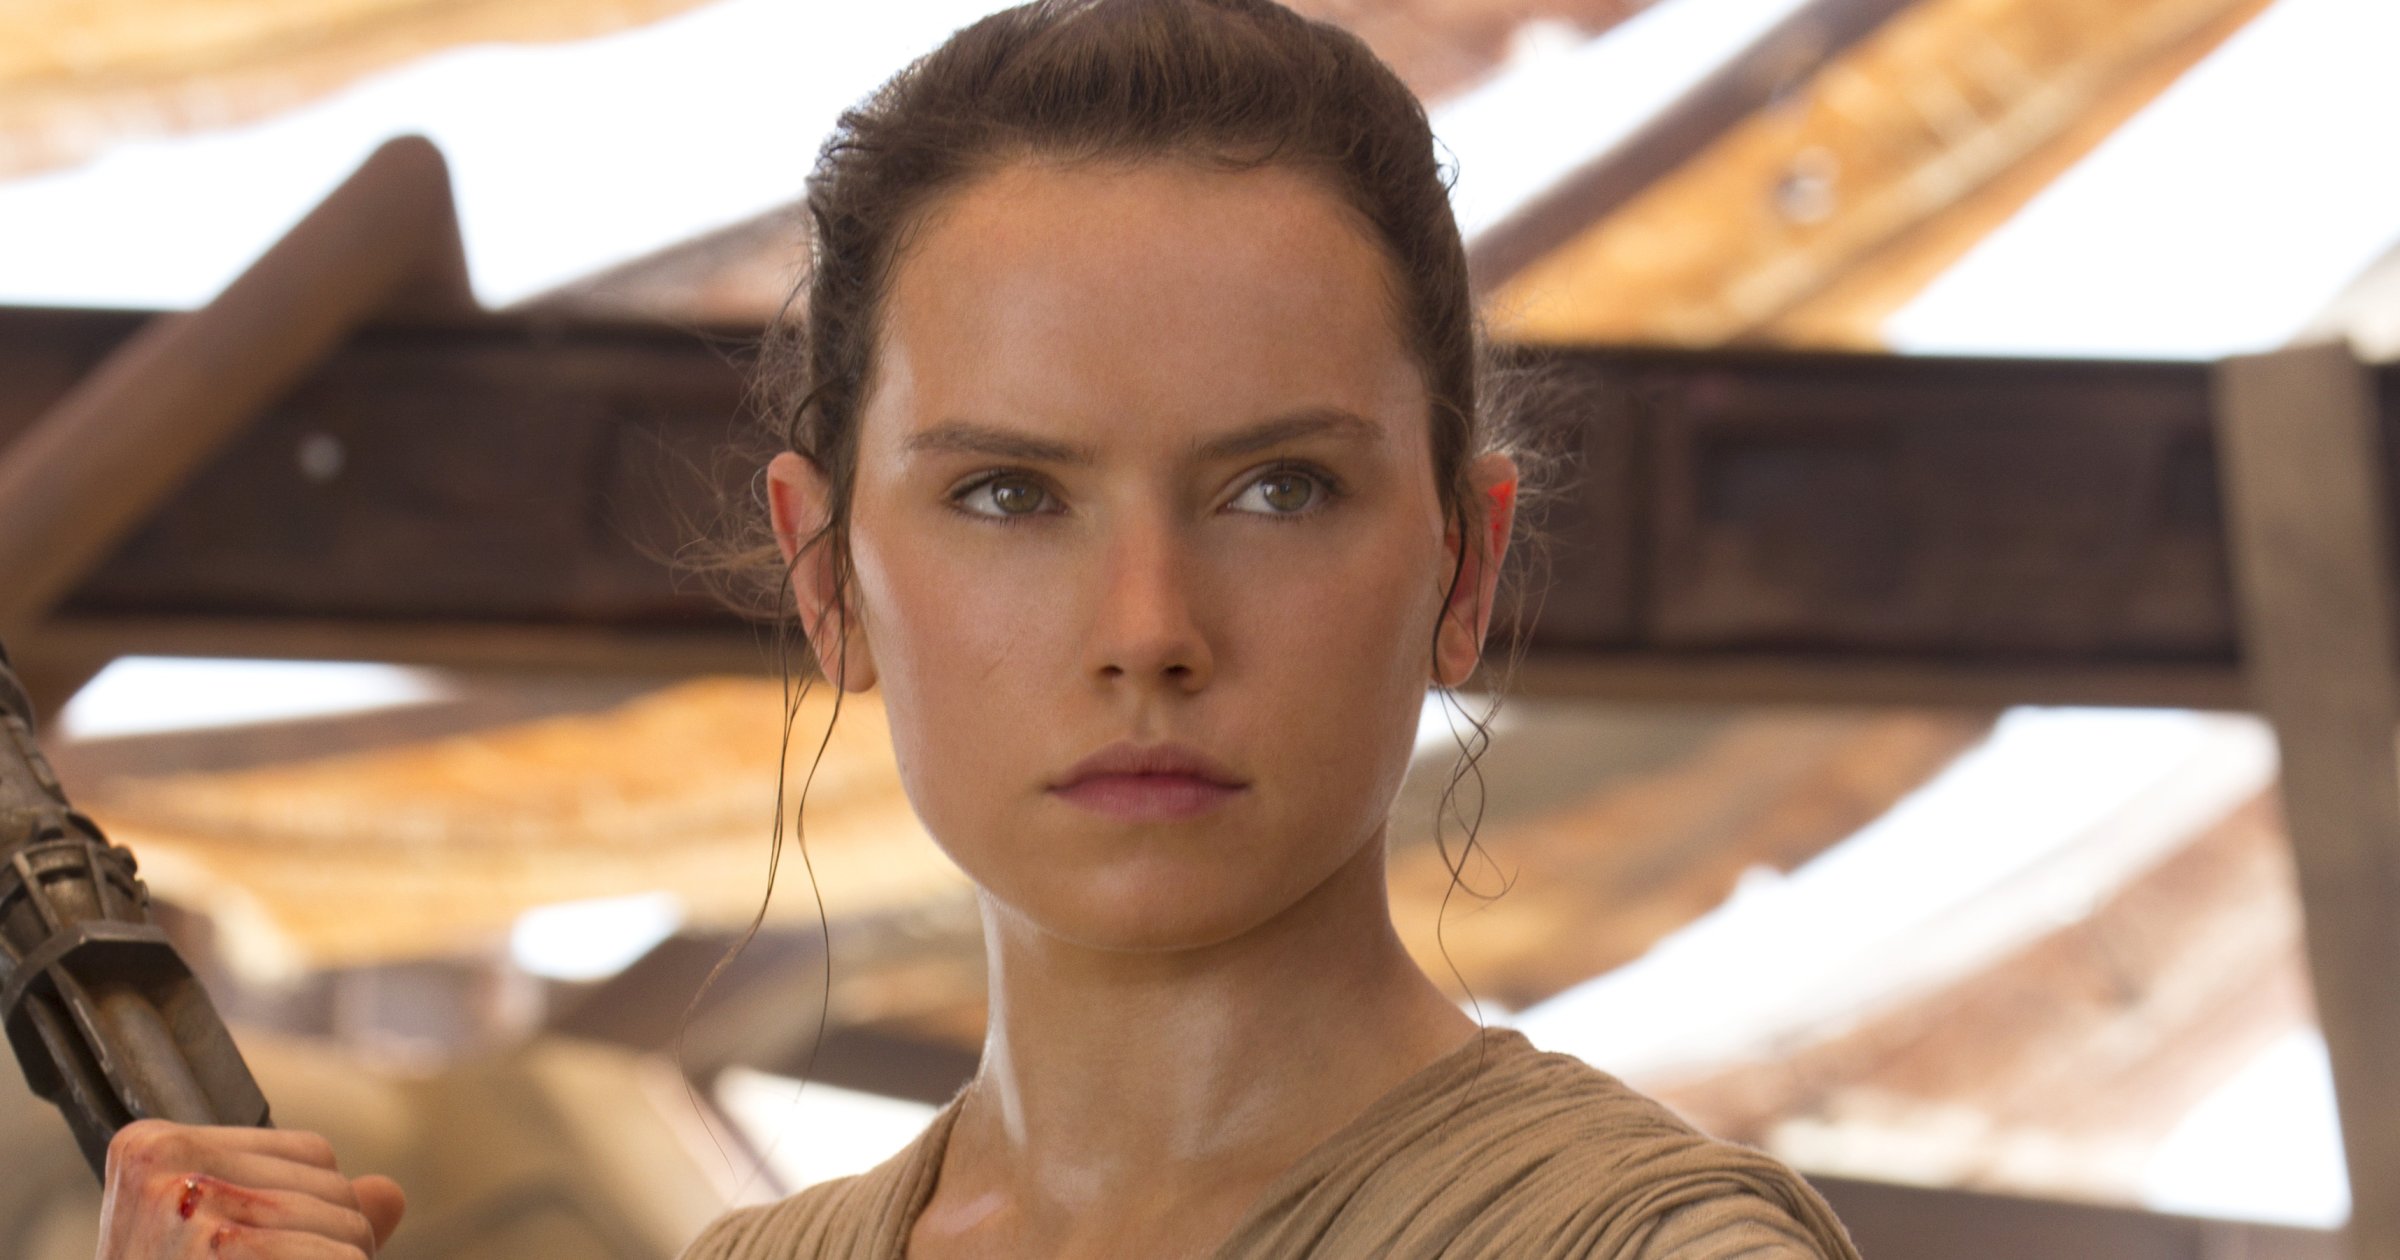 Daisy Ridley as Rey in Star Wars: The Force Awakens.